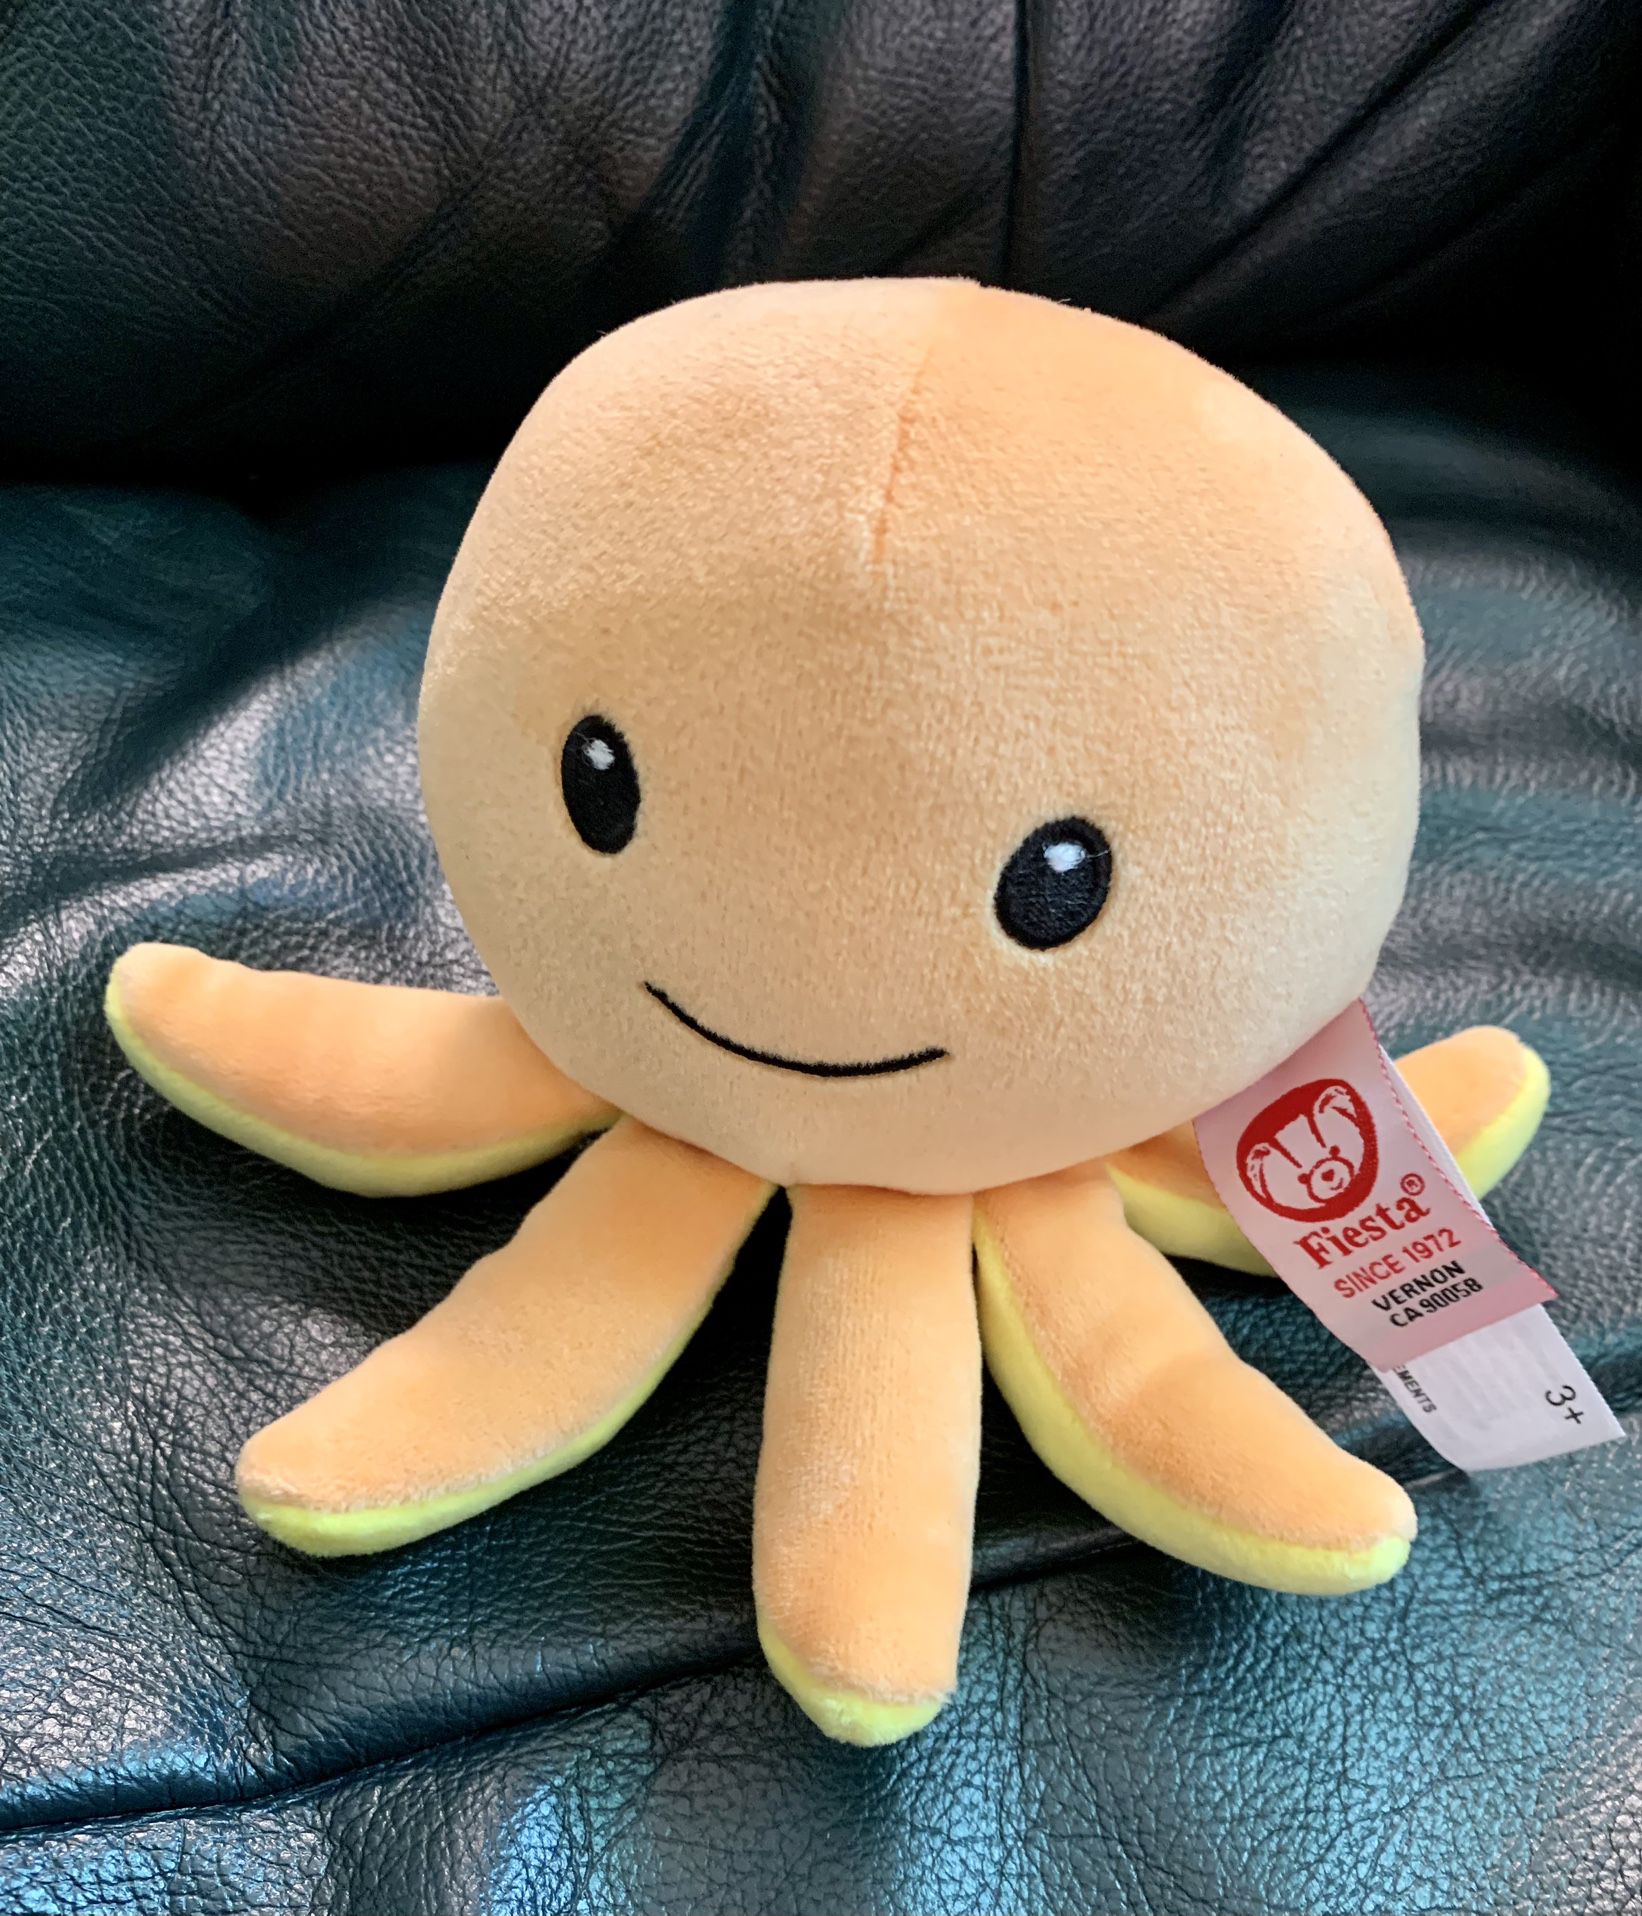 6” Plush Octopus Toy By Fiesta Like New